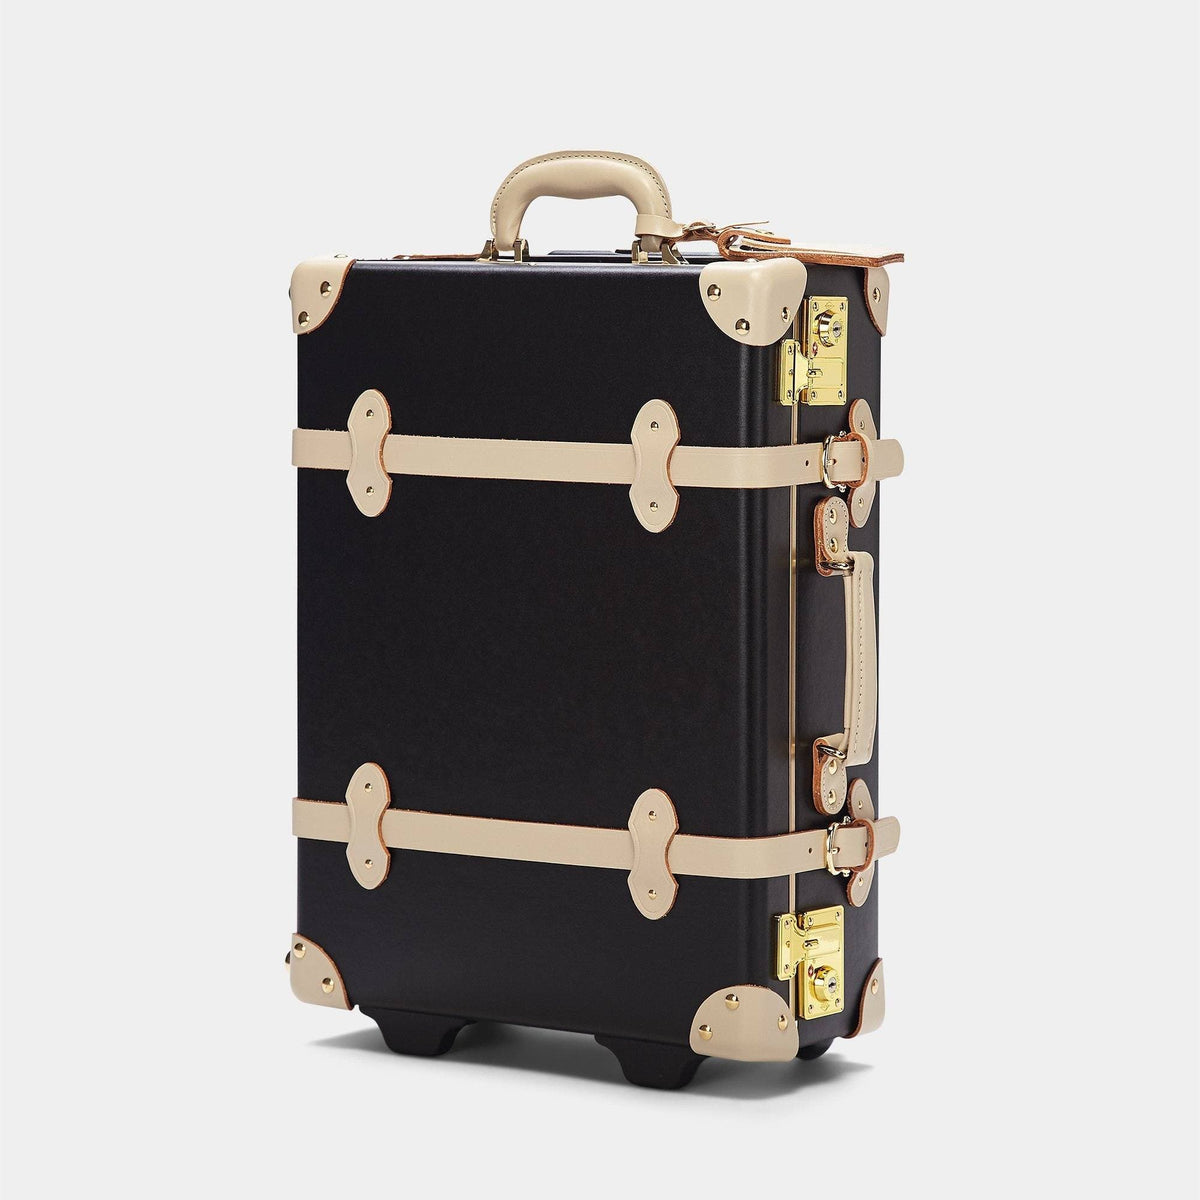 Luxury Carry-On & Cabin Luggage